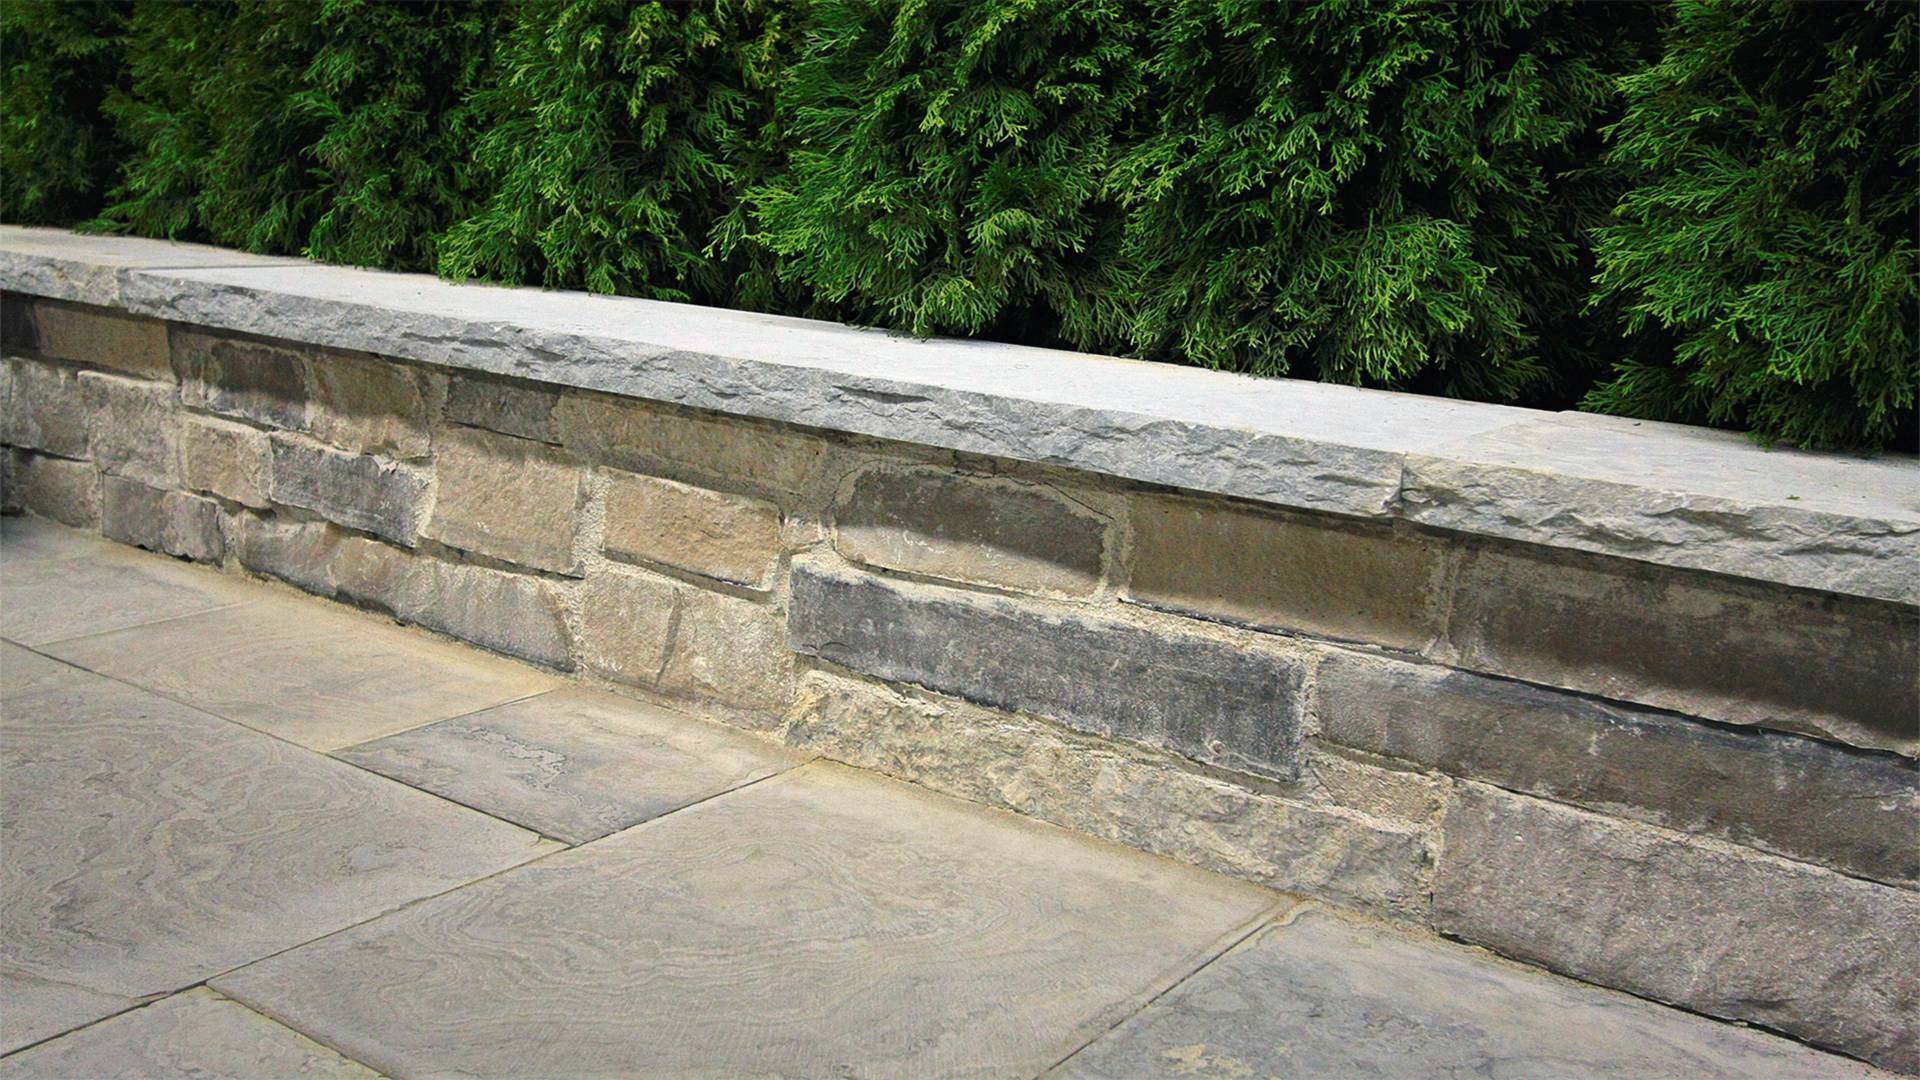 Traditional stonework / hardscaping project in London Ontario. A retaining wall.